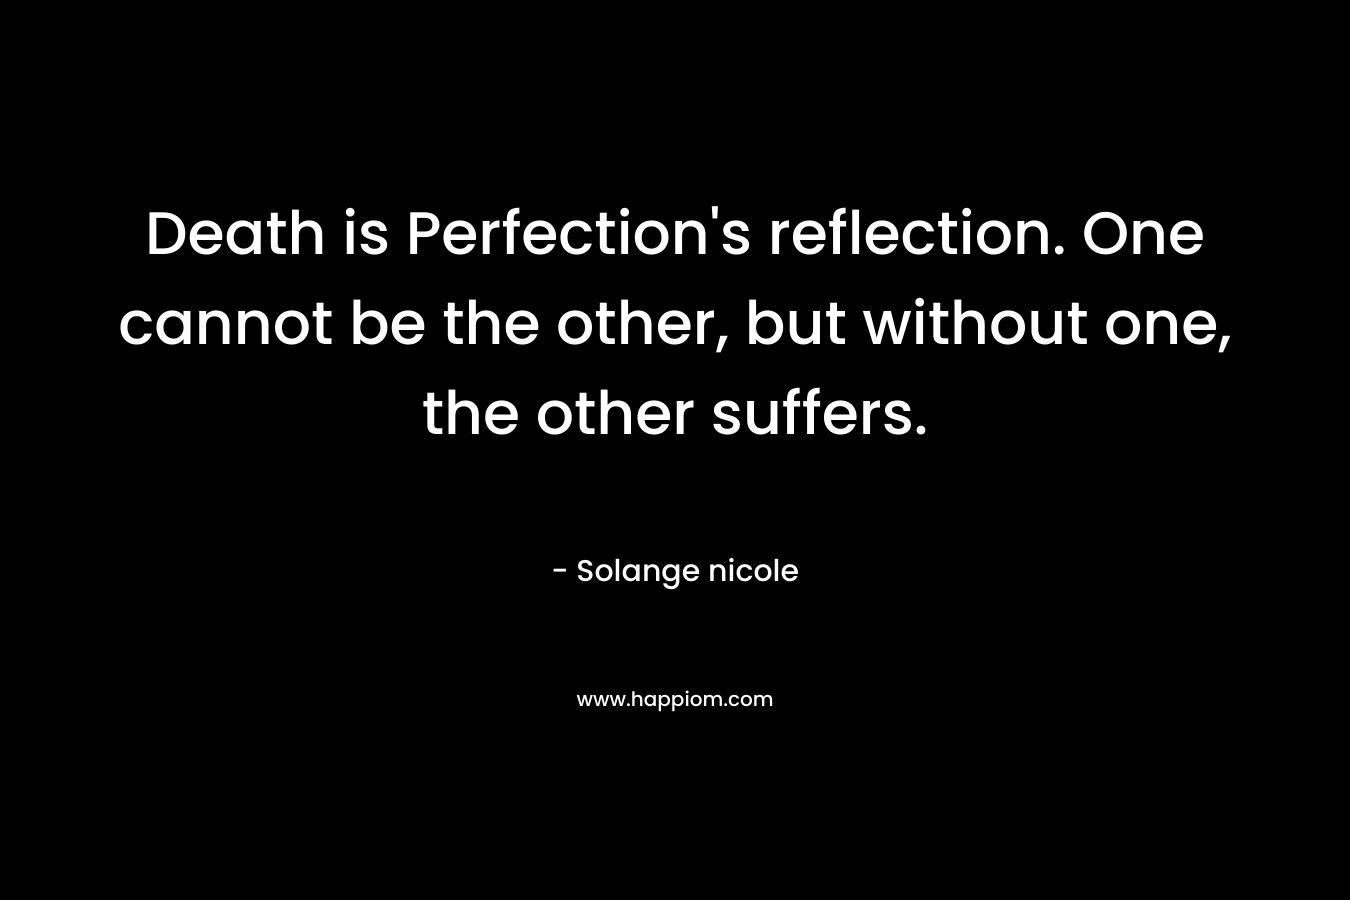 Death is Perfection’s reflection. One cannot be the other, but without one, the other suffers. – Solange nicole